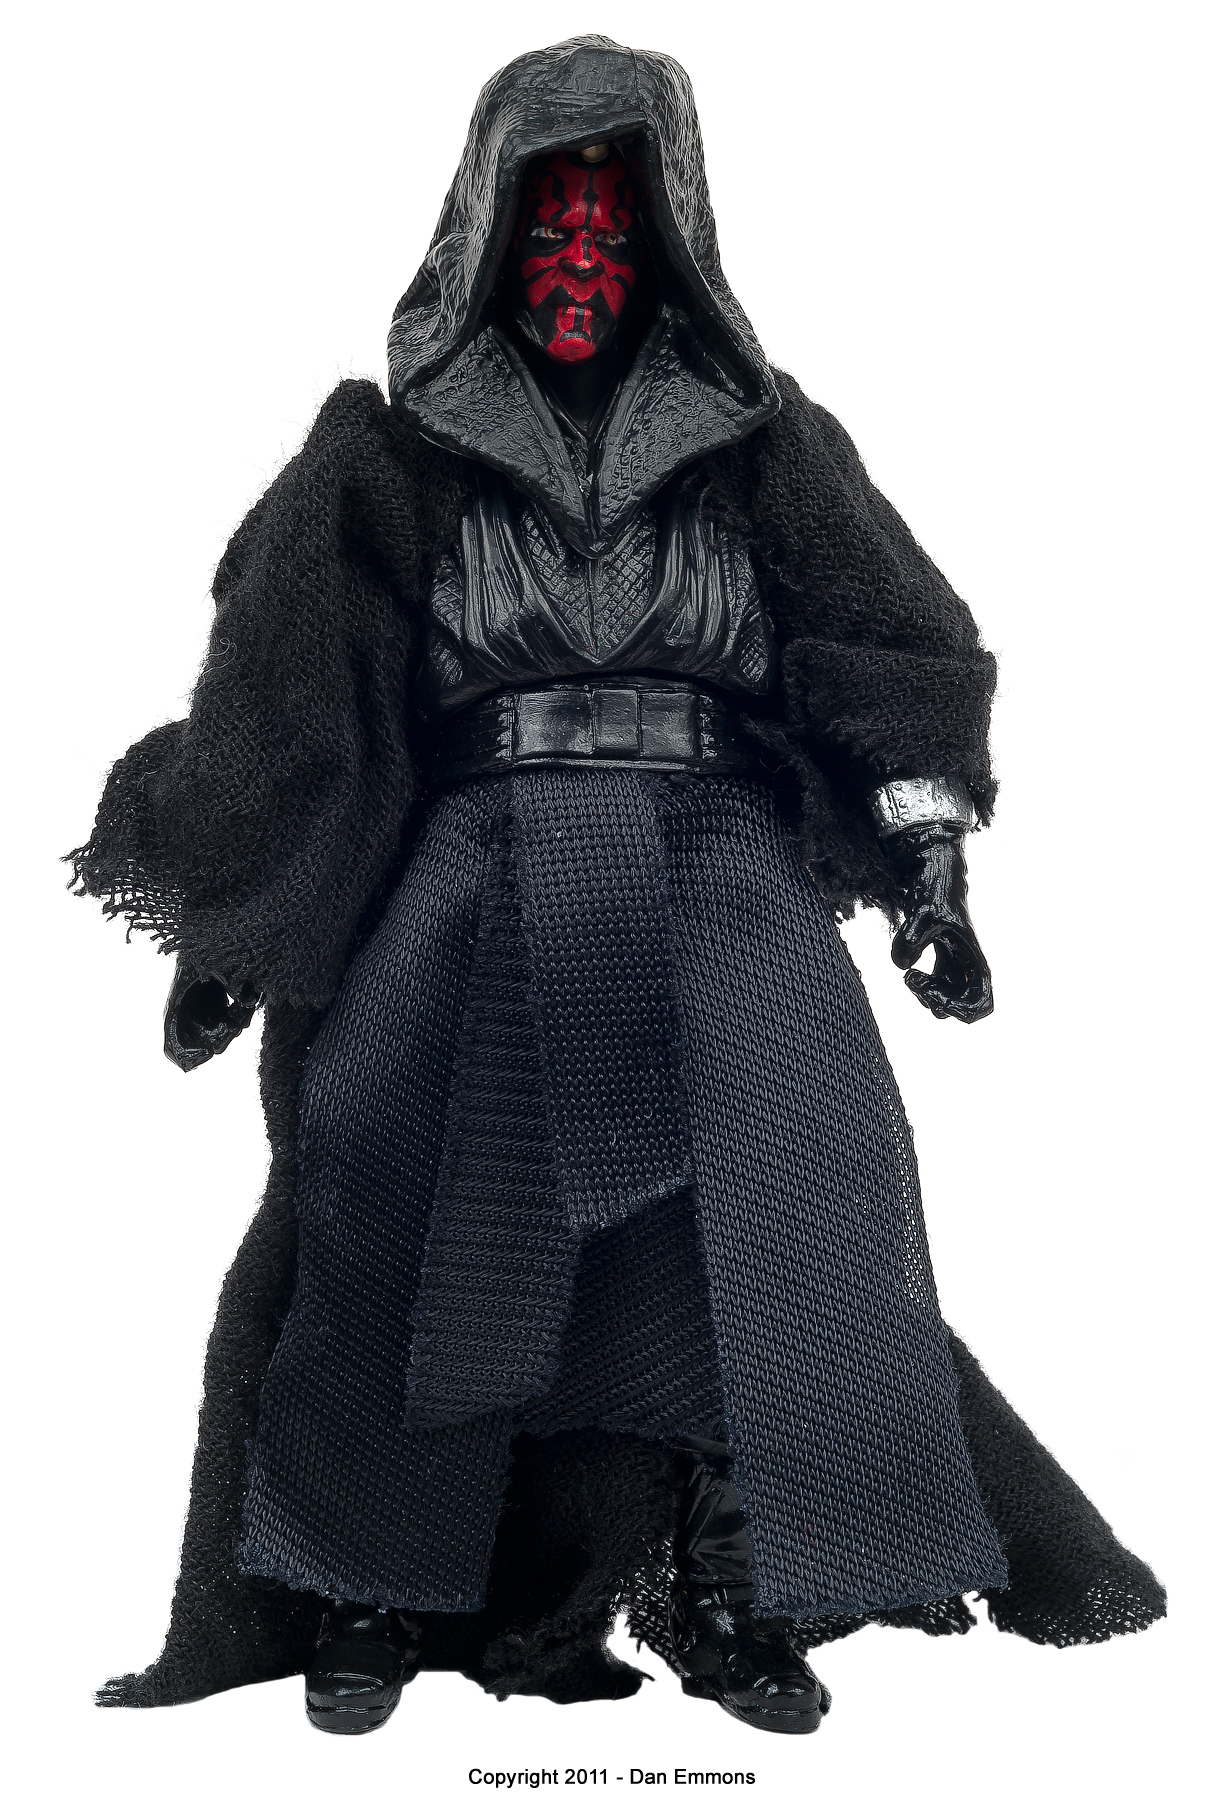 The Vintage Collection - VC86: Darth Maul